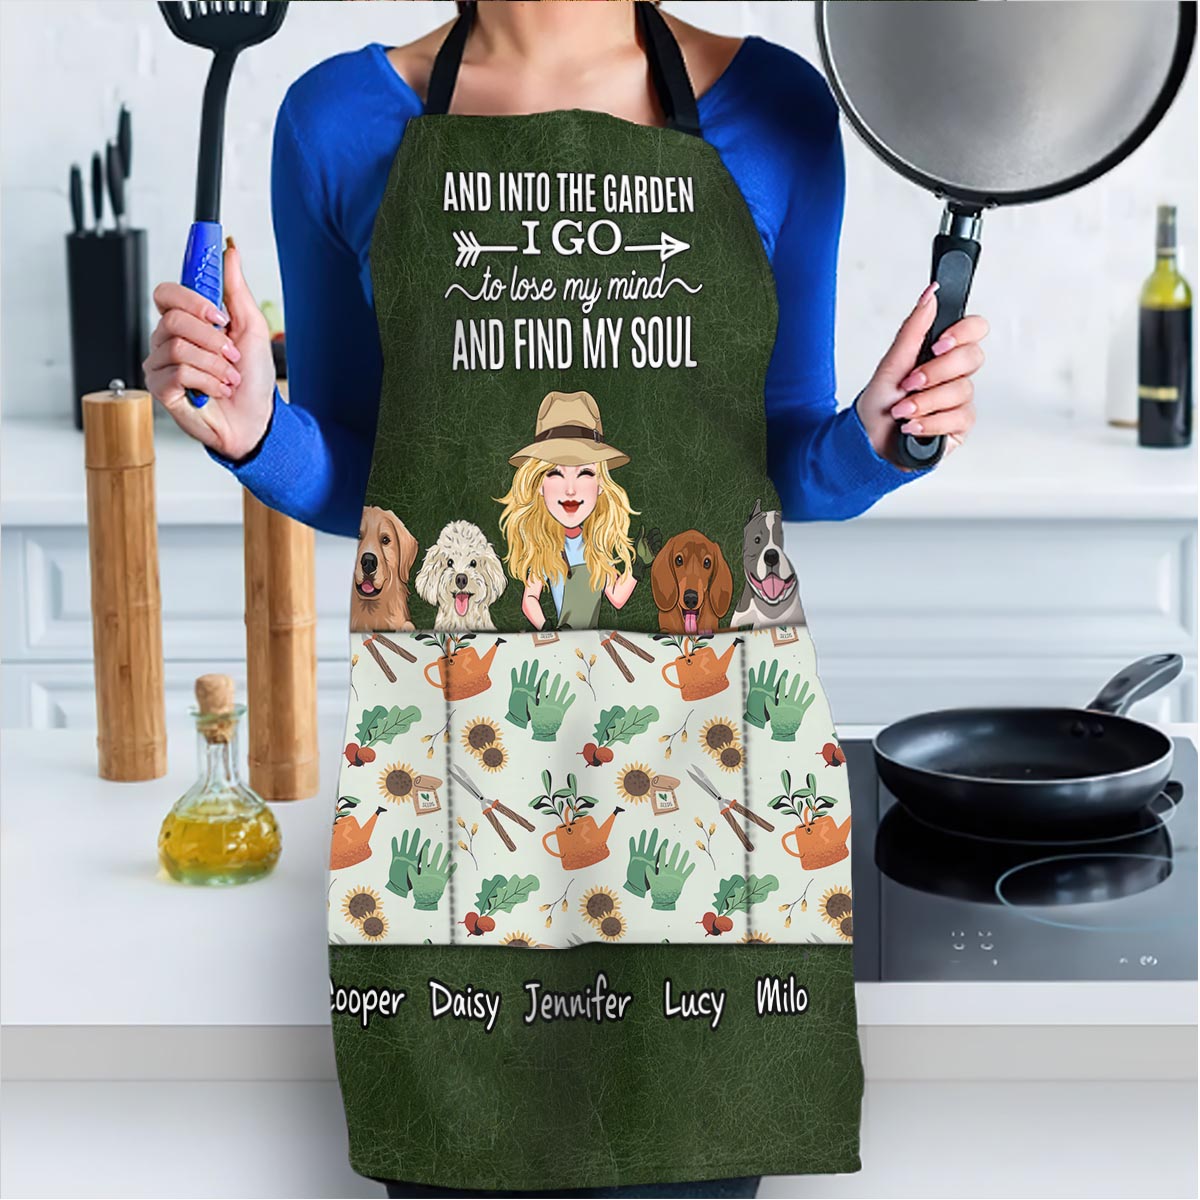 And Into The Garden I Go - Gardening gift for mom, wife, her, girlfriend, grandma, dog lover, cat lover - Personalized Apron